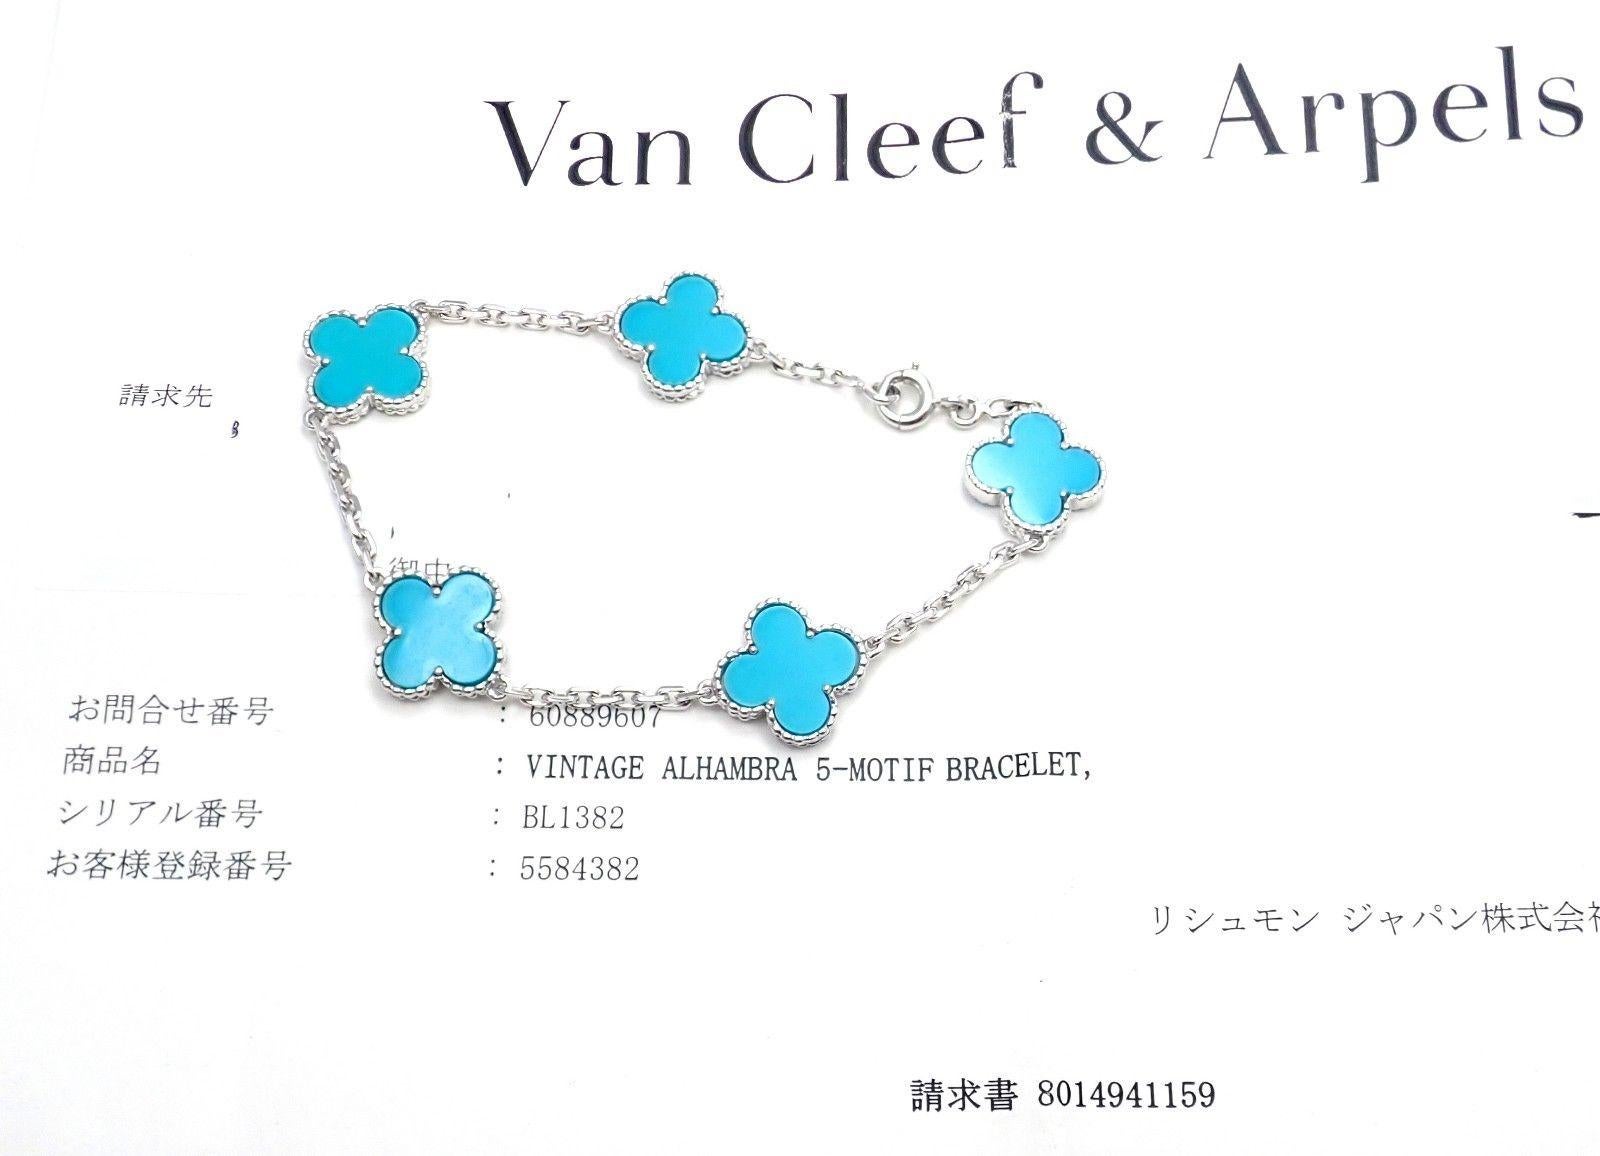 18k White Gold Vintage Turquoise Alhambra Bracelet from Van Cleef & Arpels.  
With 5 alhambra shape turquoise stones. 
This bracelet comes with Van Cleef & Arpels service paper and a box.
Details:  
Length: 7.5'' 
Weight: 11.2 grams
Stamped